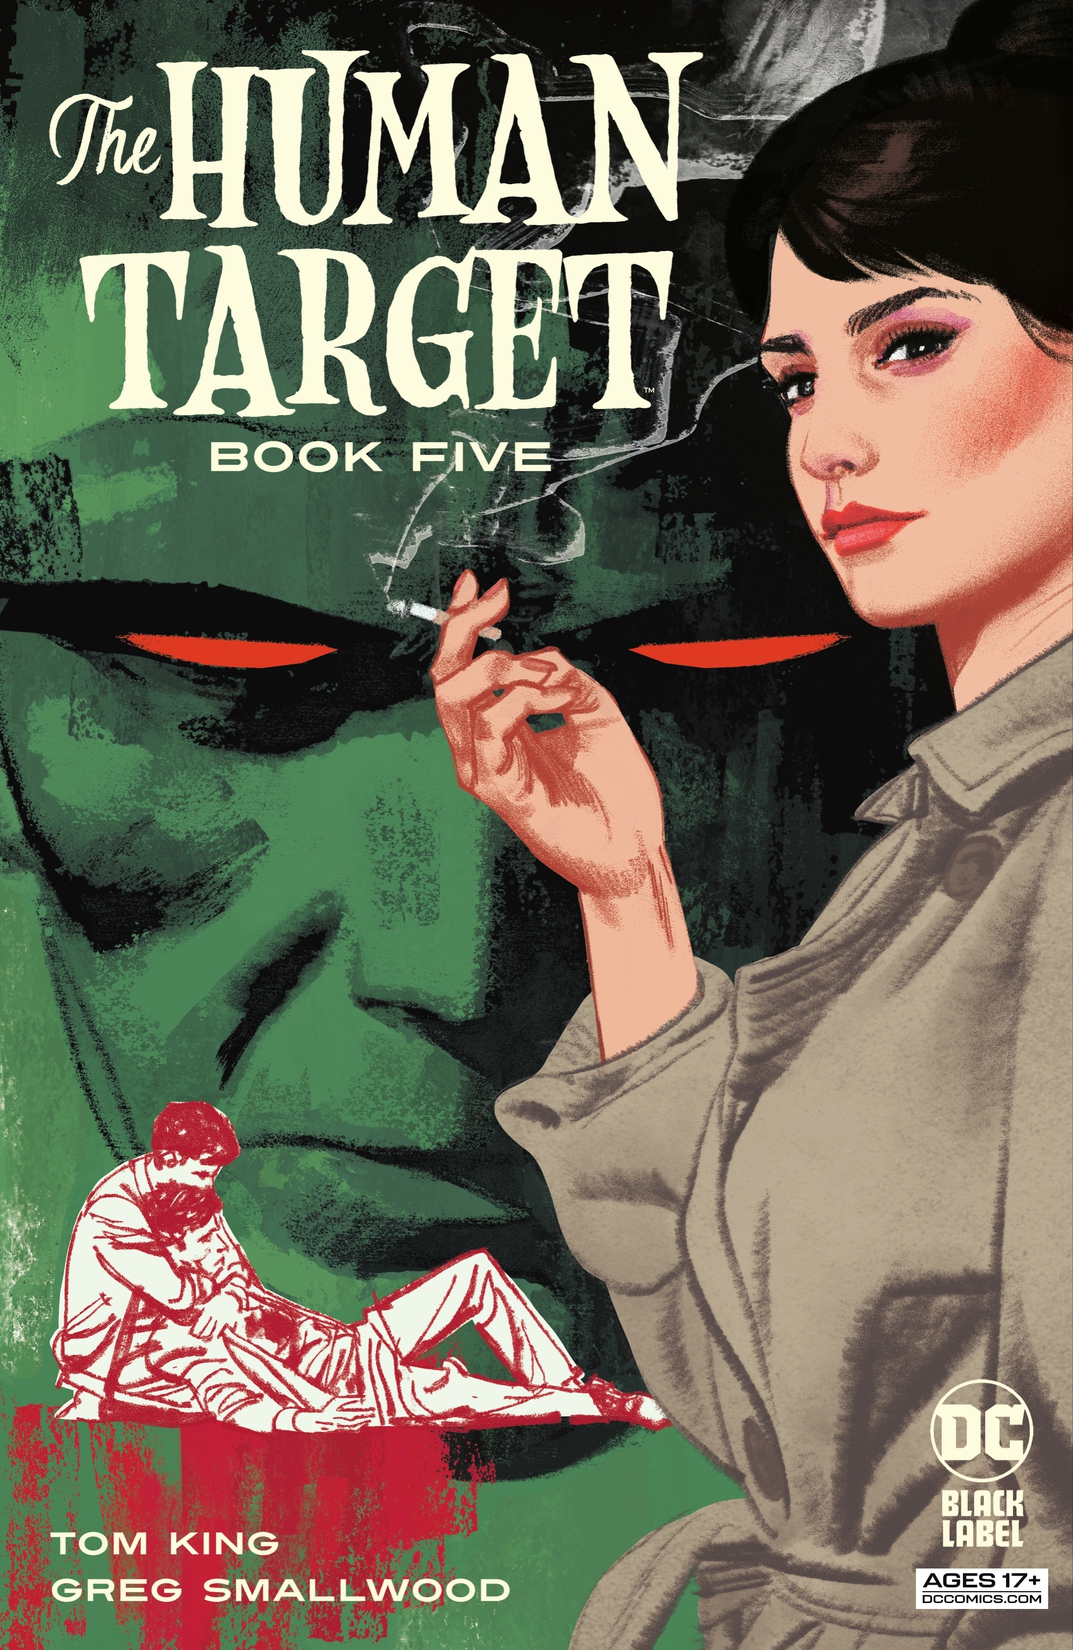 The Human Target #5 preview images